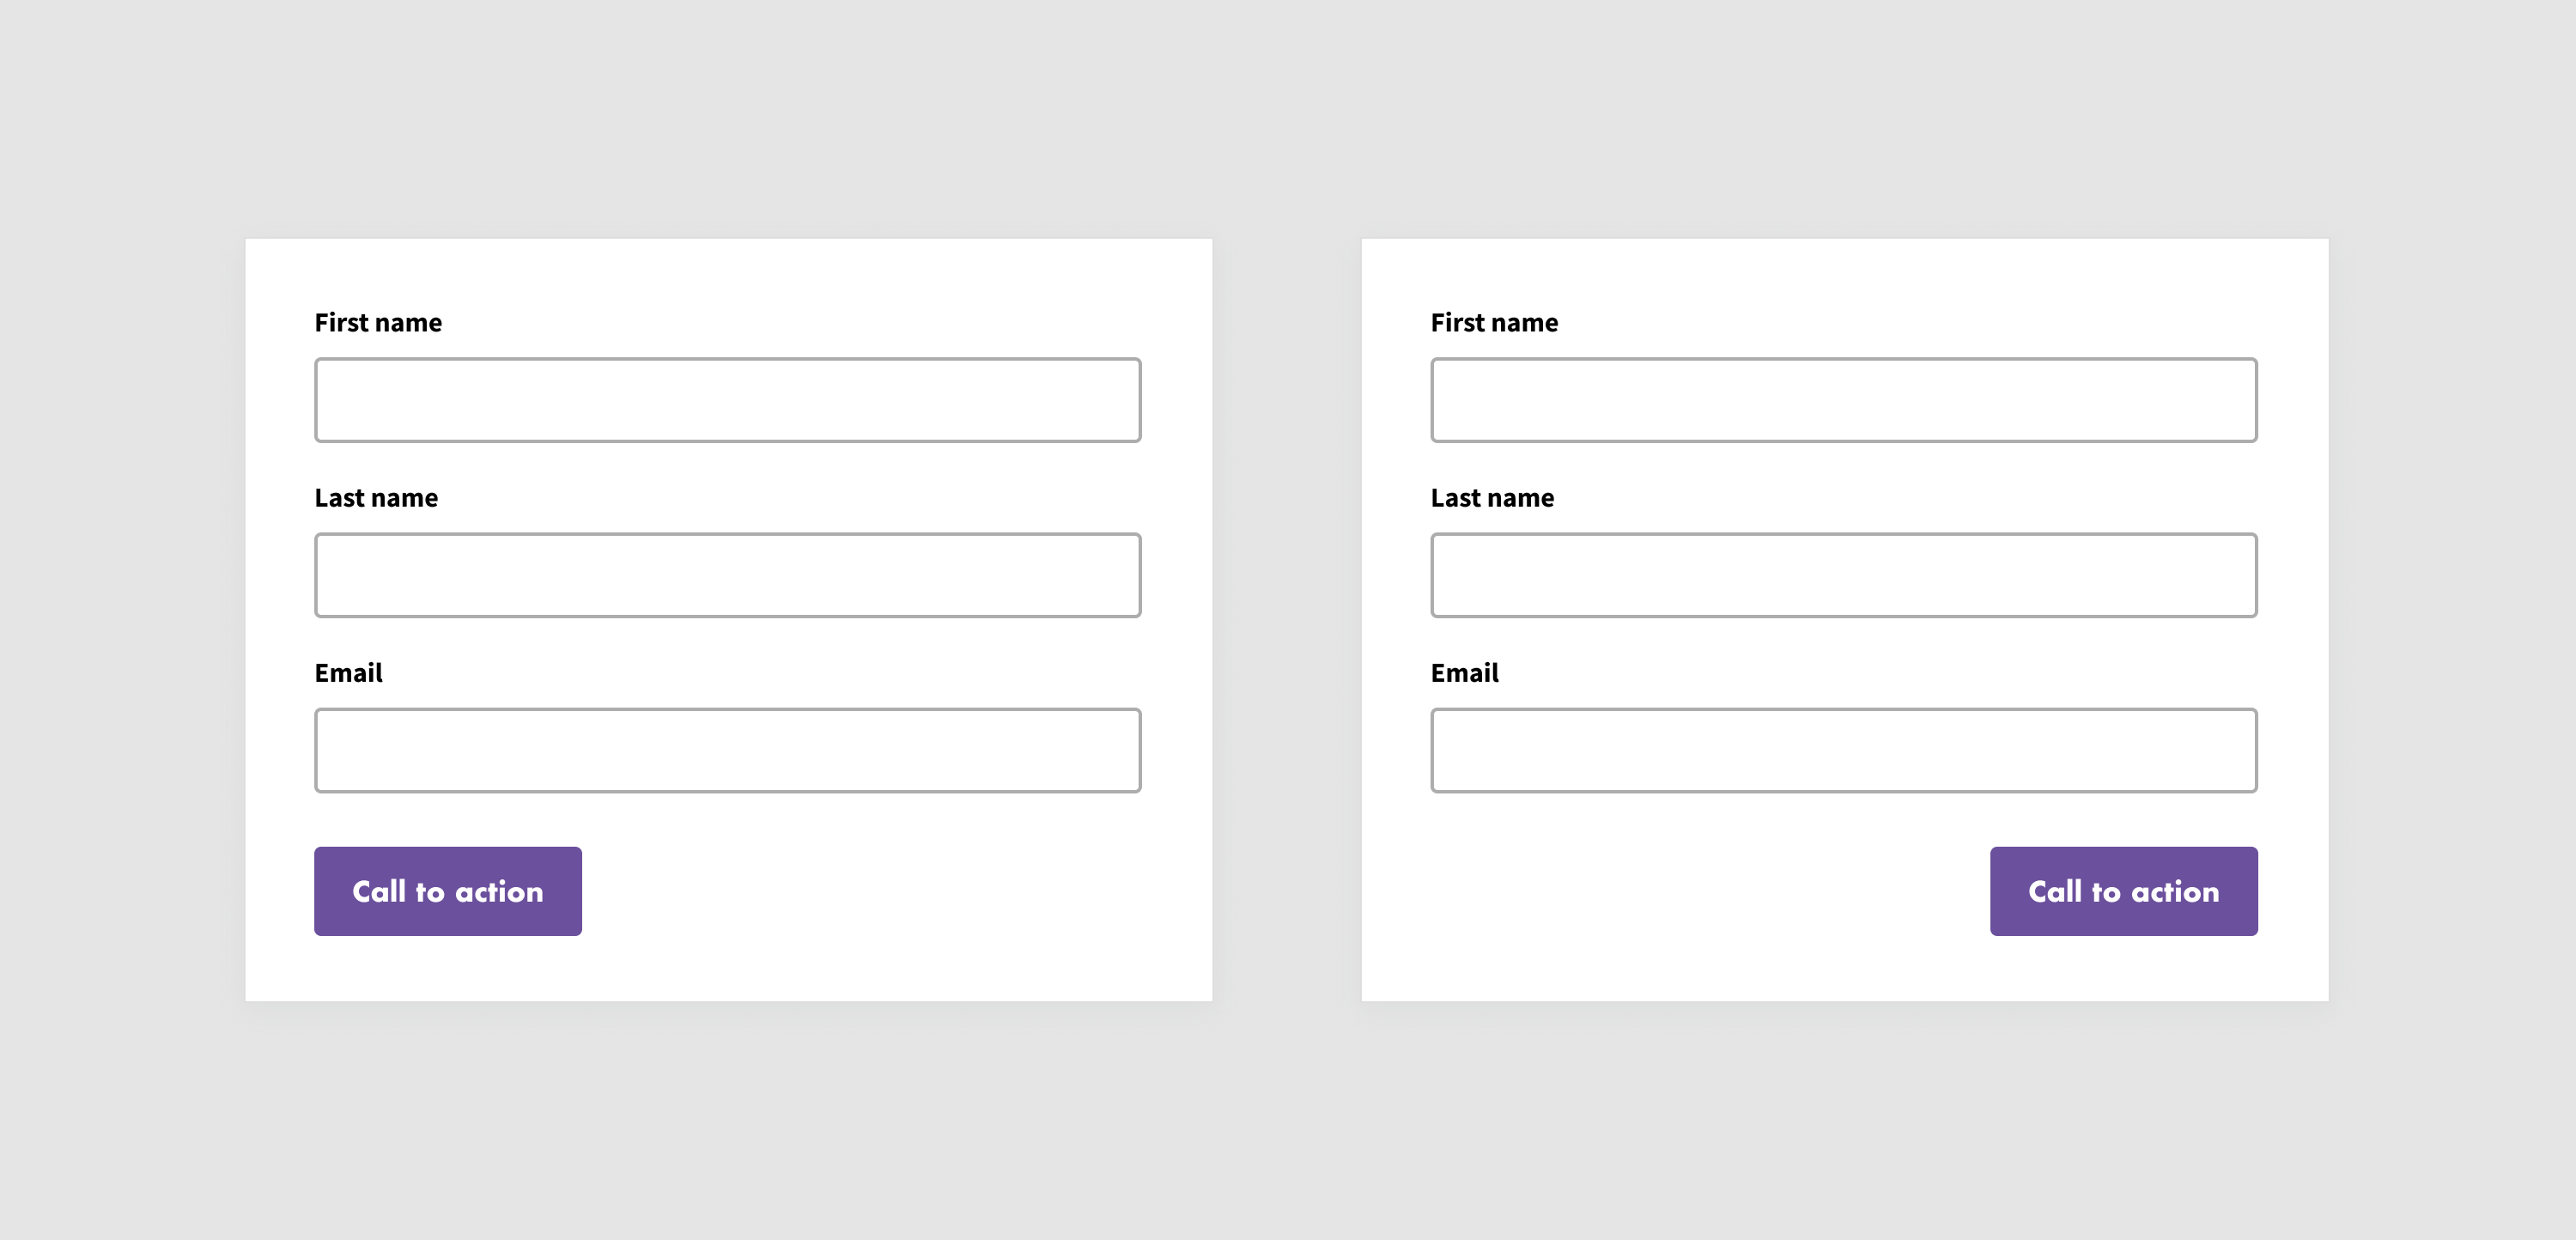 Dueling sign up pages. One with the CTA button on the left, the other with the button on the right.